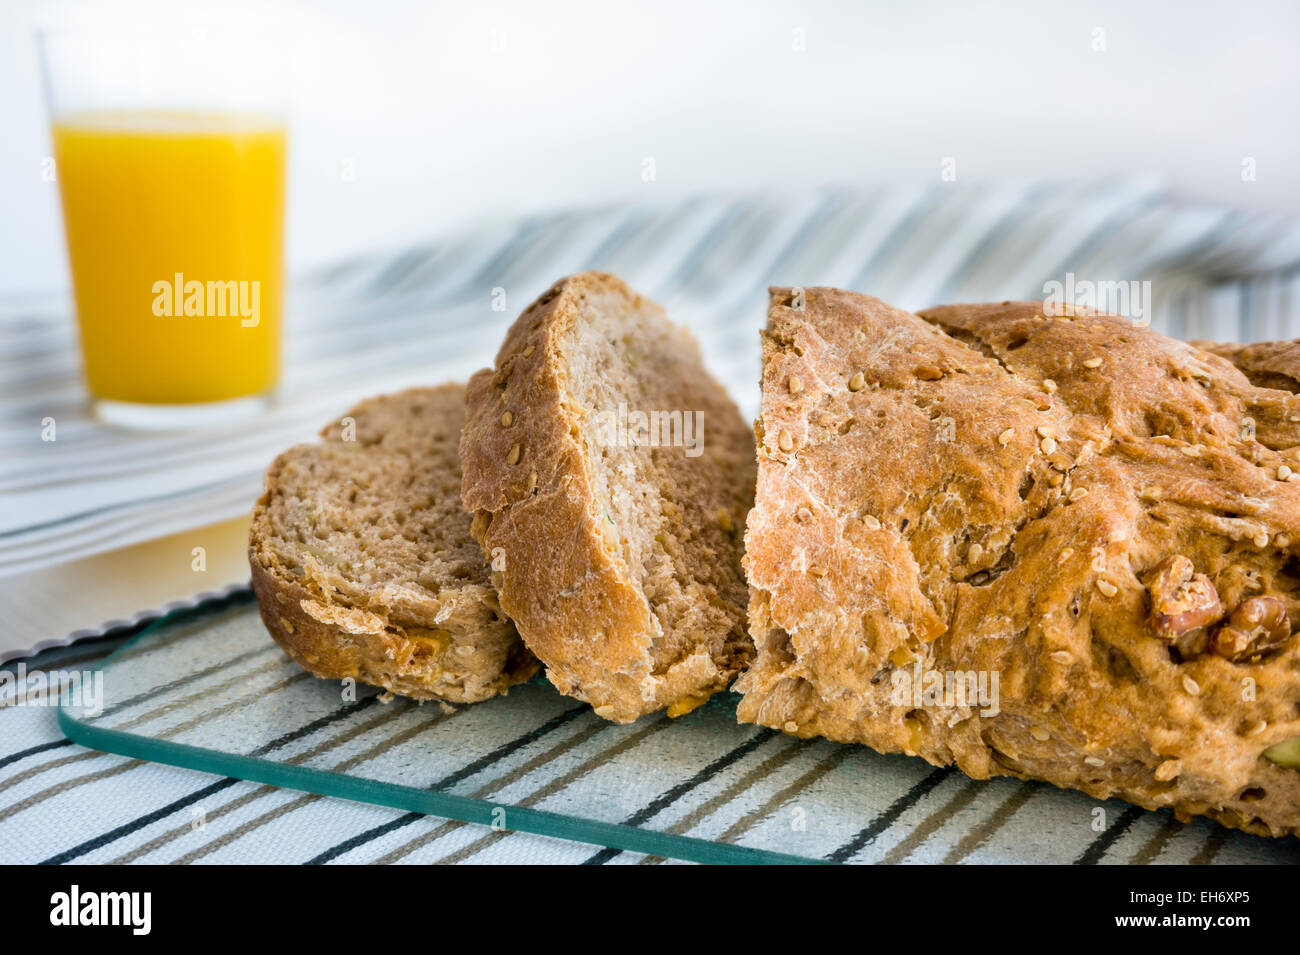 A close-up of a loaf of wholesome bread and bread knife with a glass of orange juice on a striped cloth and glass cutting board Stock Photo